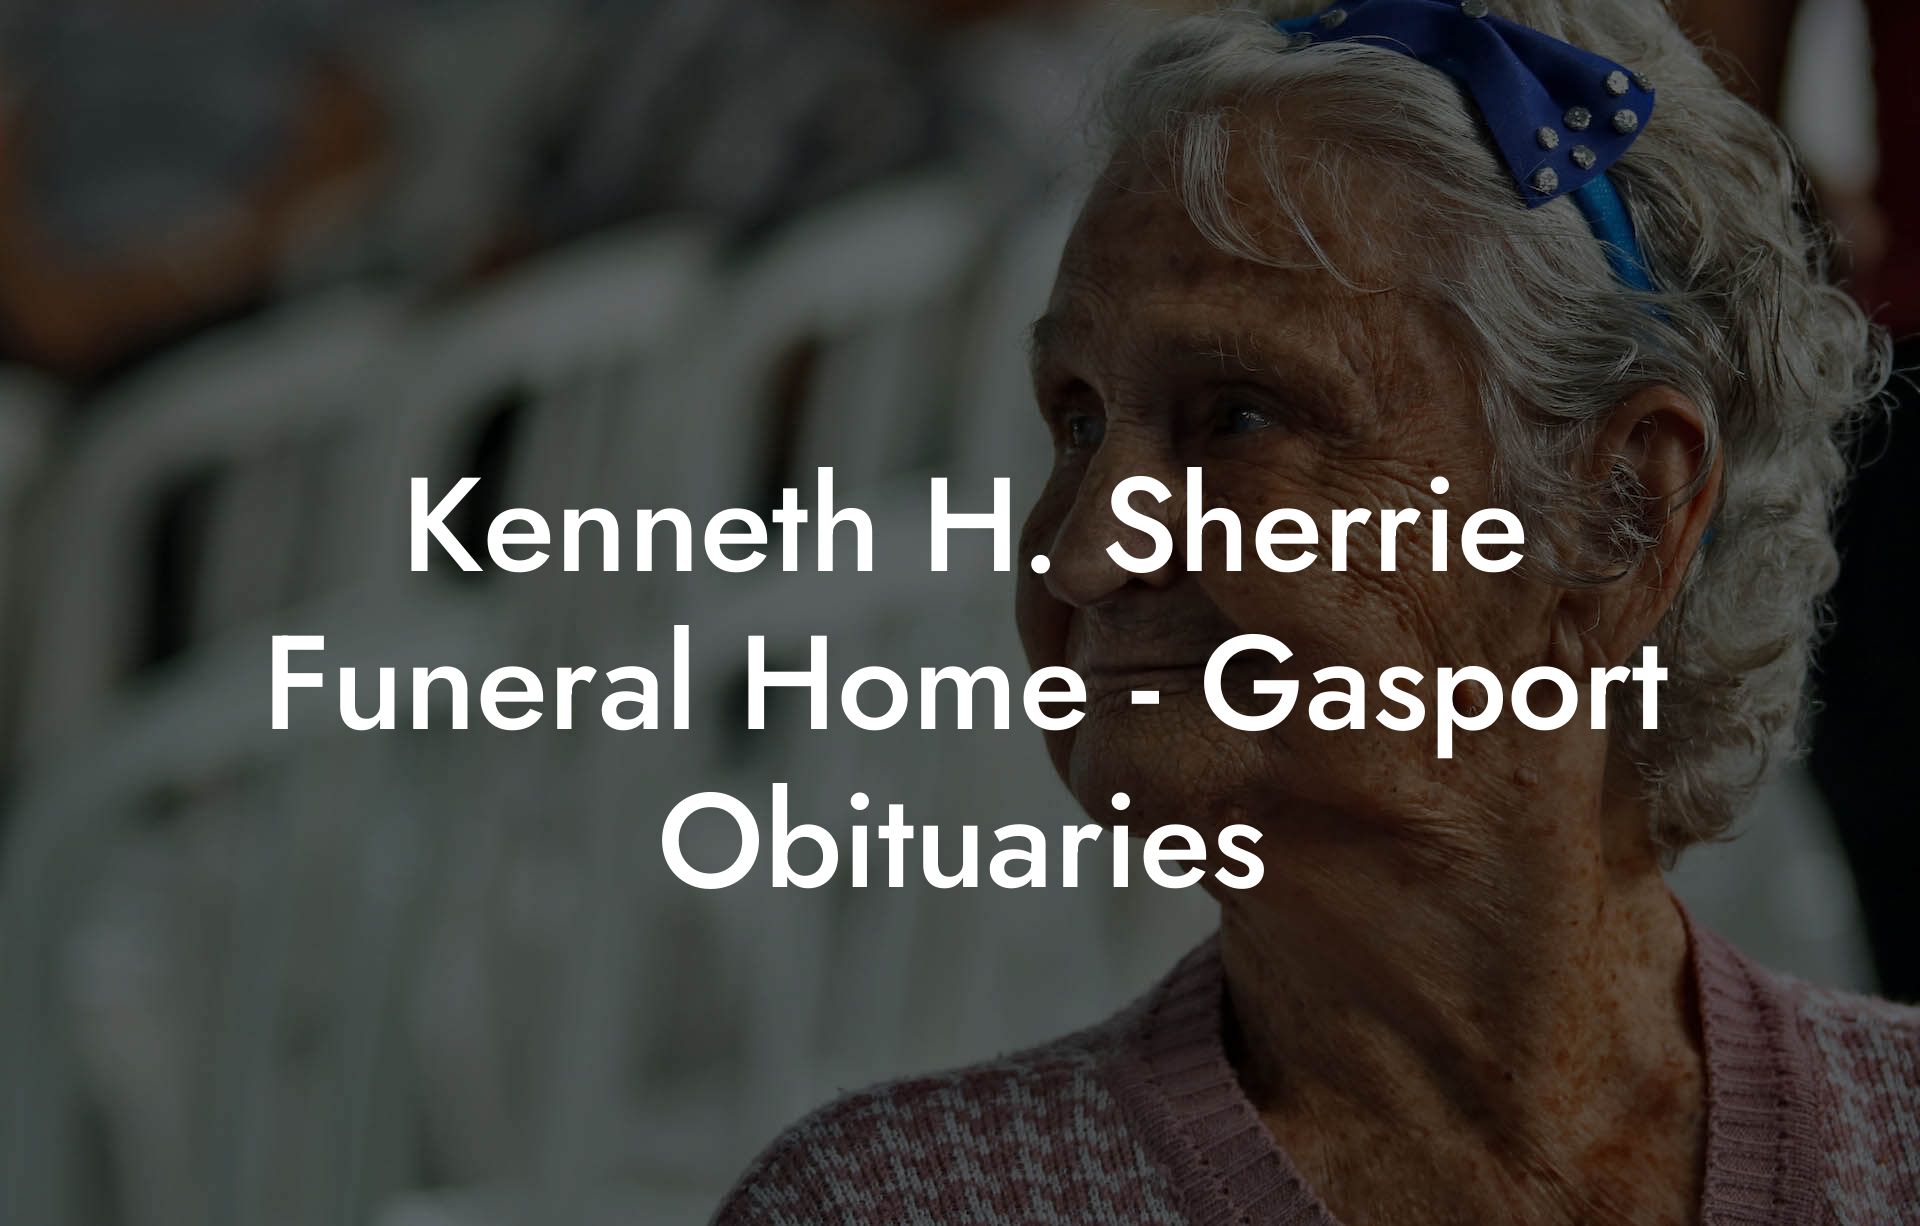 Kenneth H. Sherrie Funeral Home - Gasport Obituaries